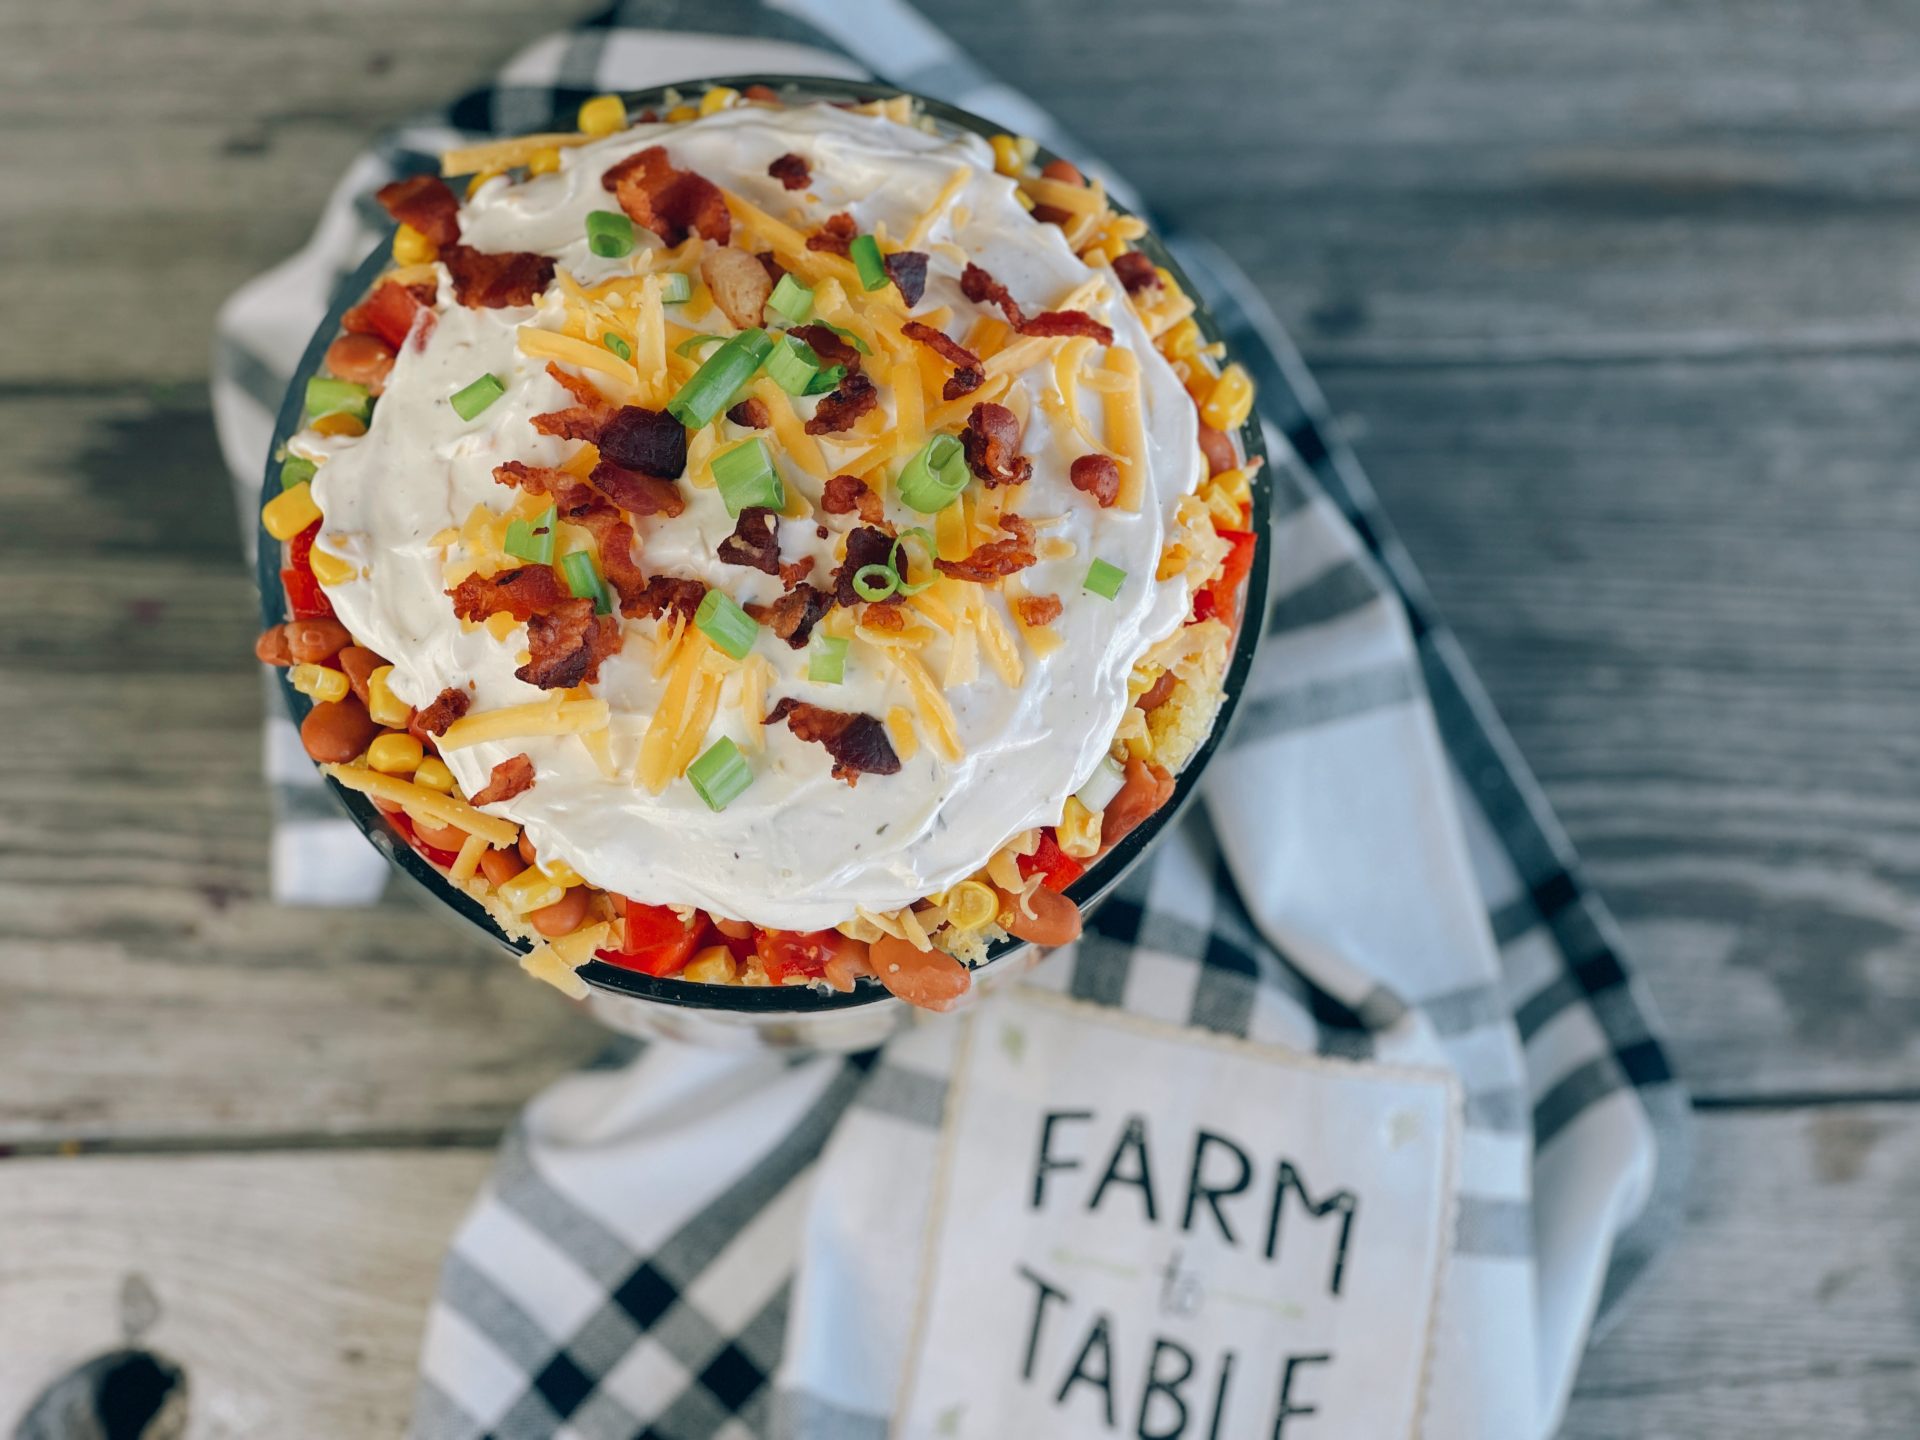 Back Home Cornbread Salad from Farmwife Feeds, an easy layered salad perfect for get-togethers or pitch-ins. #salad #layeredsalad #cornbread